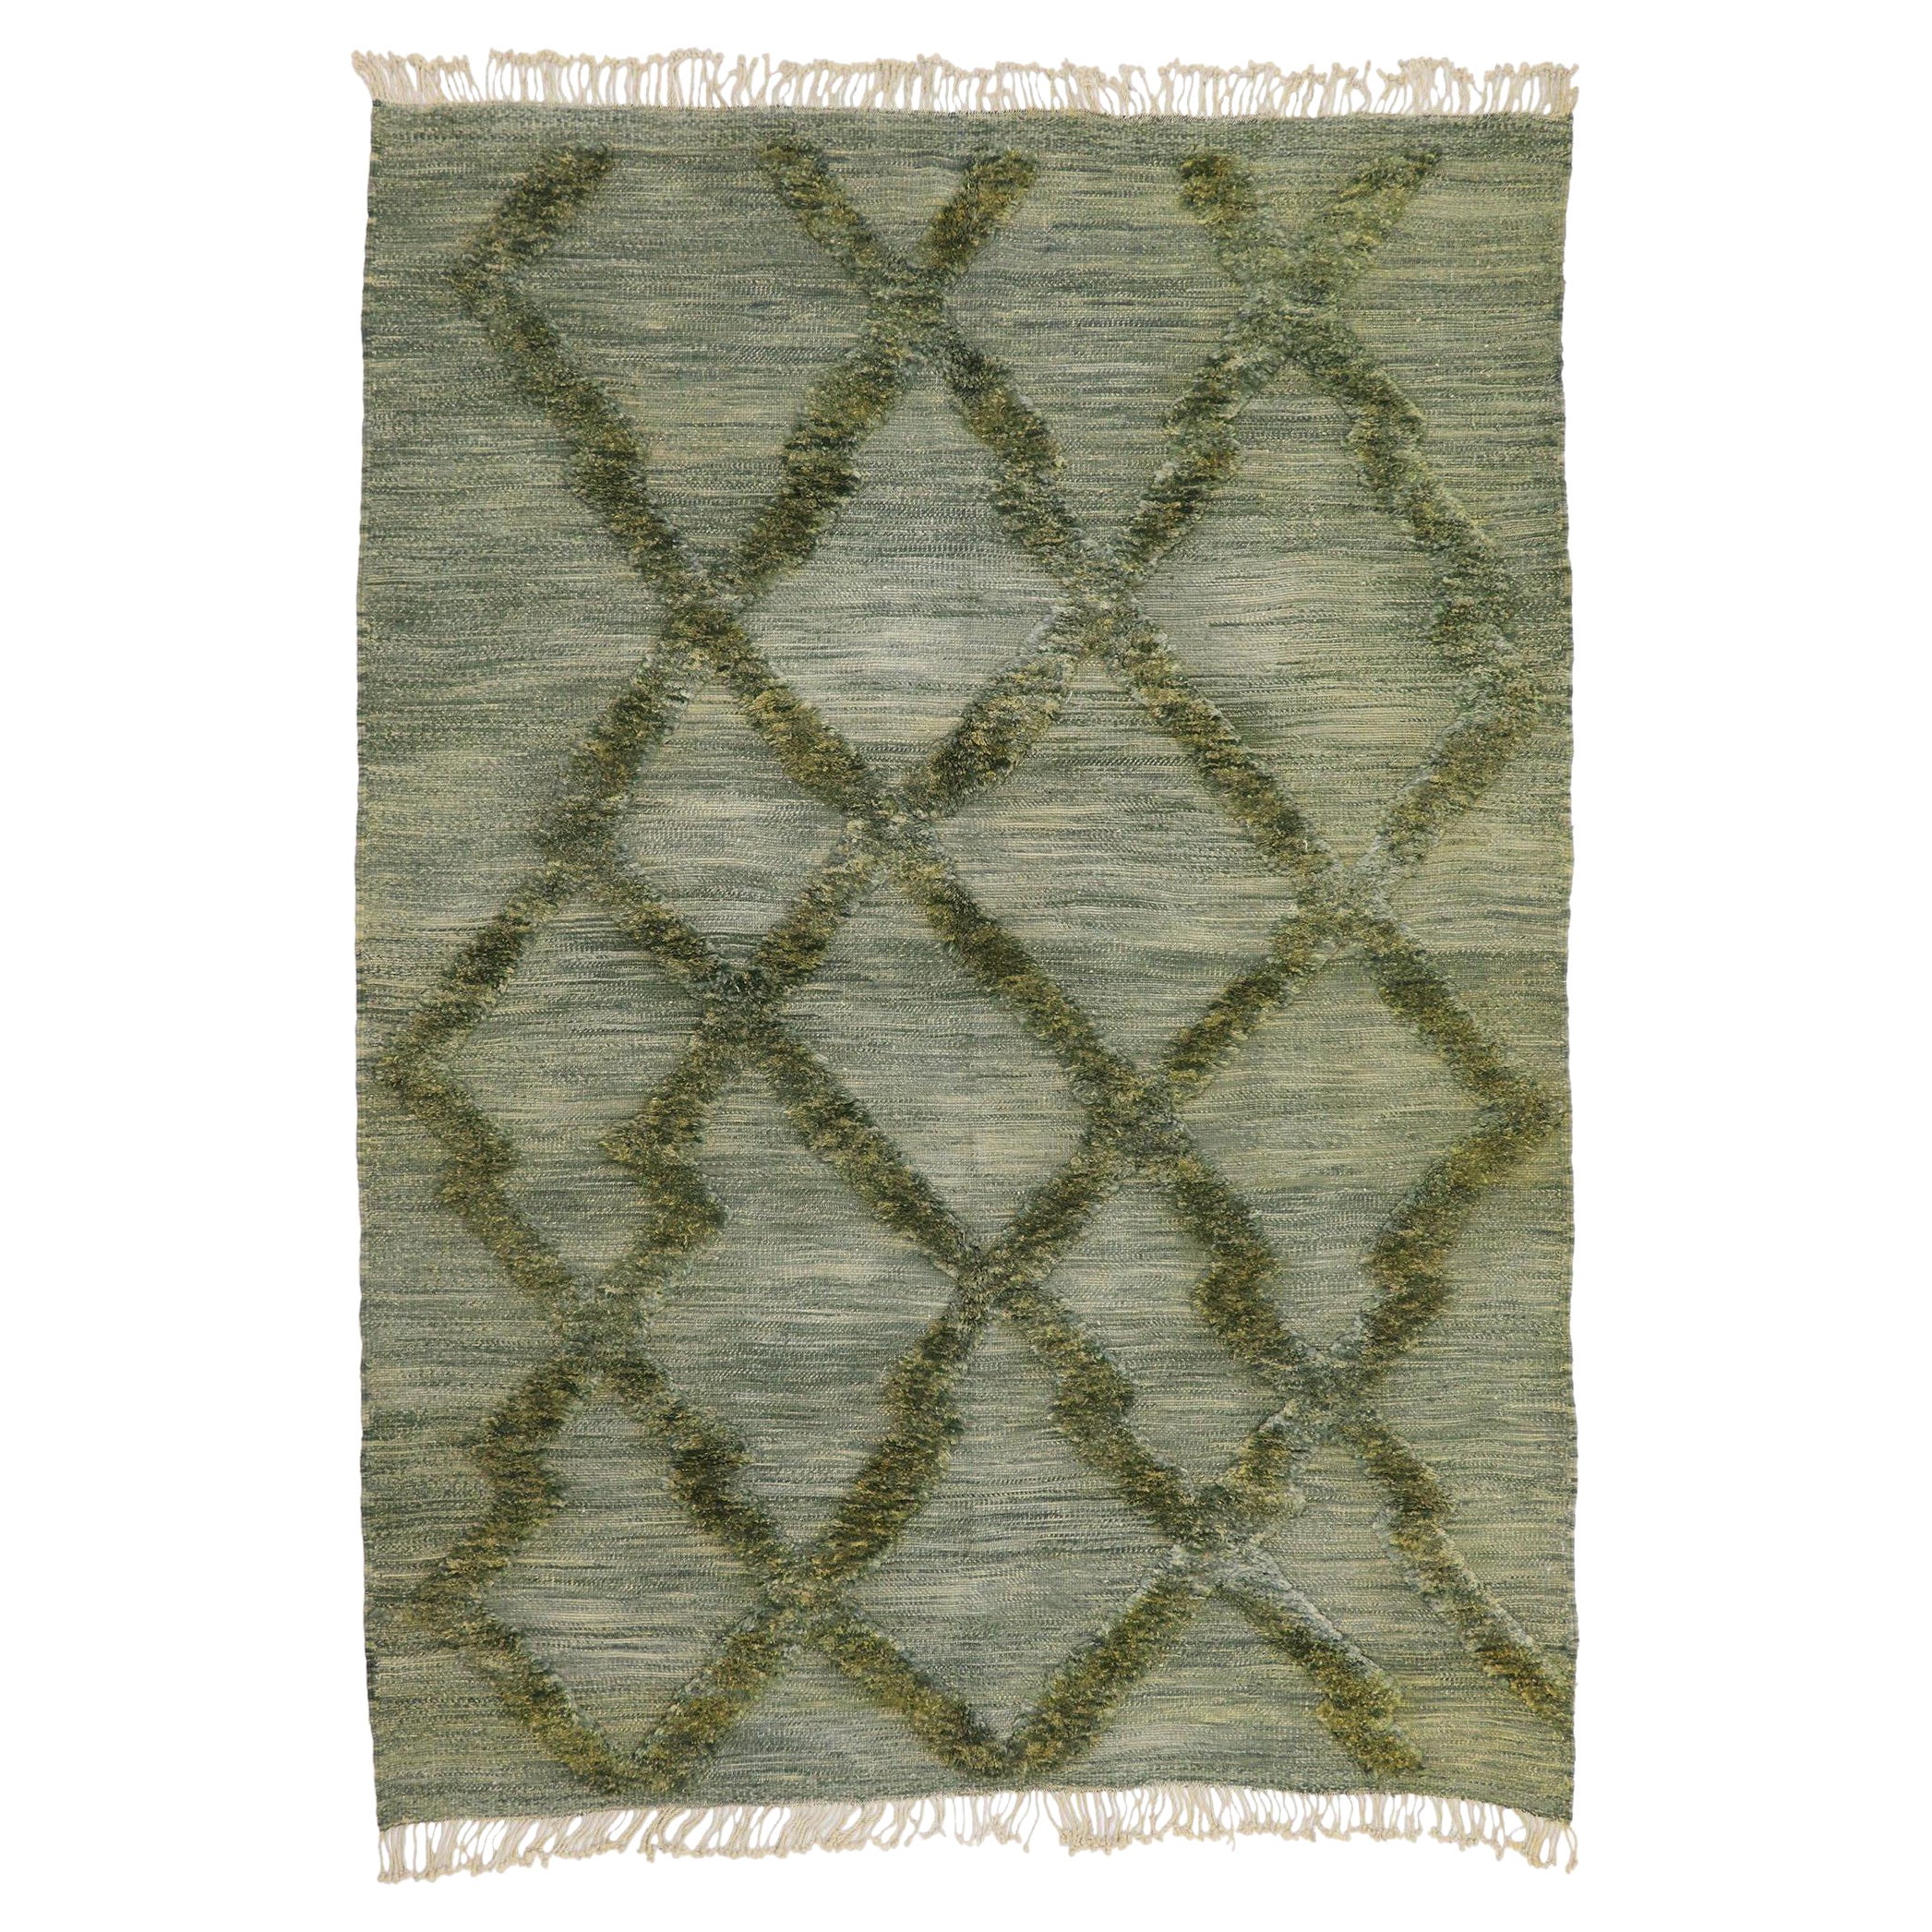 New Contemporary Berber Moroccan Rug with Biophilic Design For Sale at ...